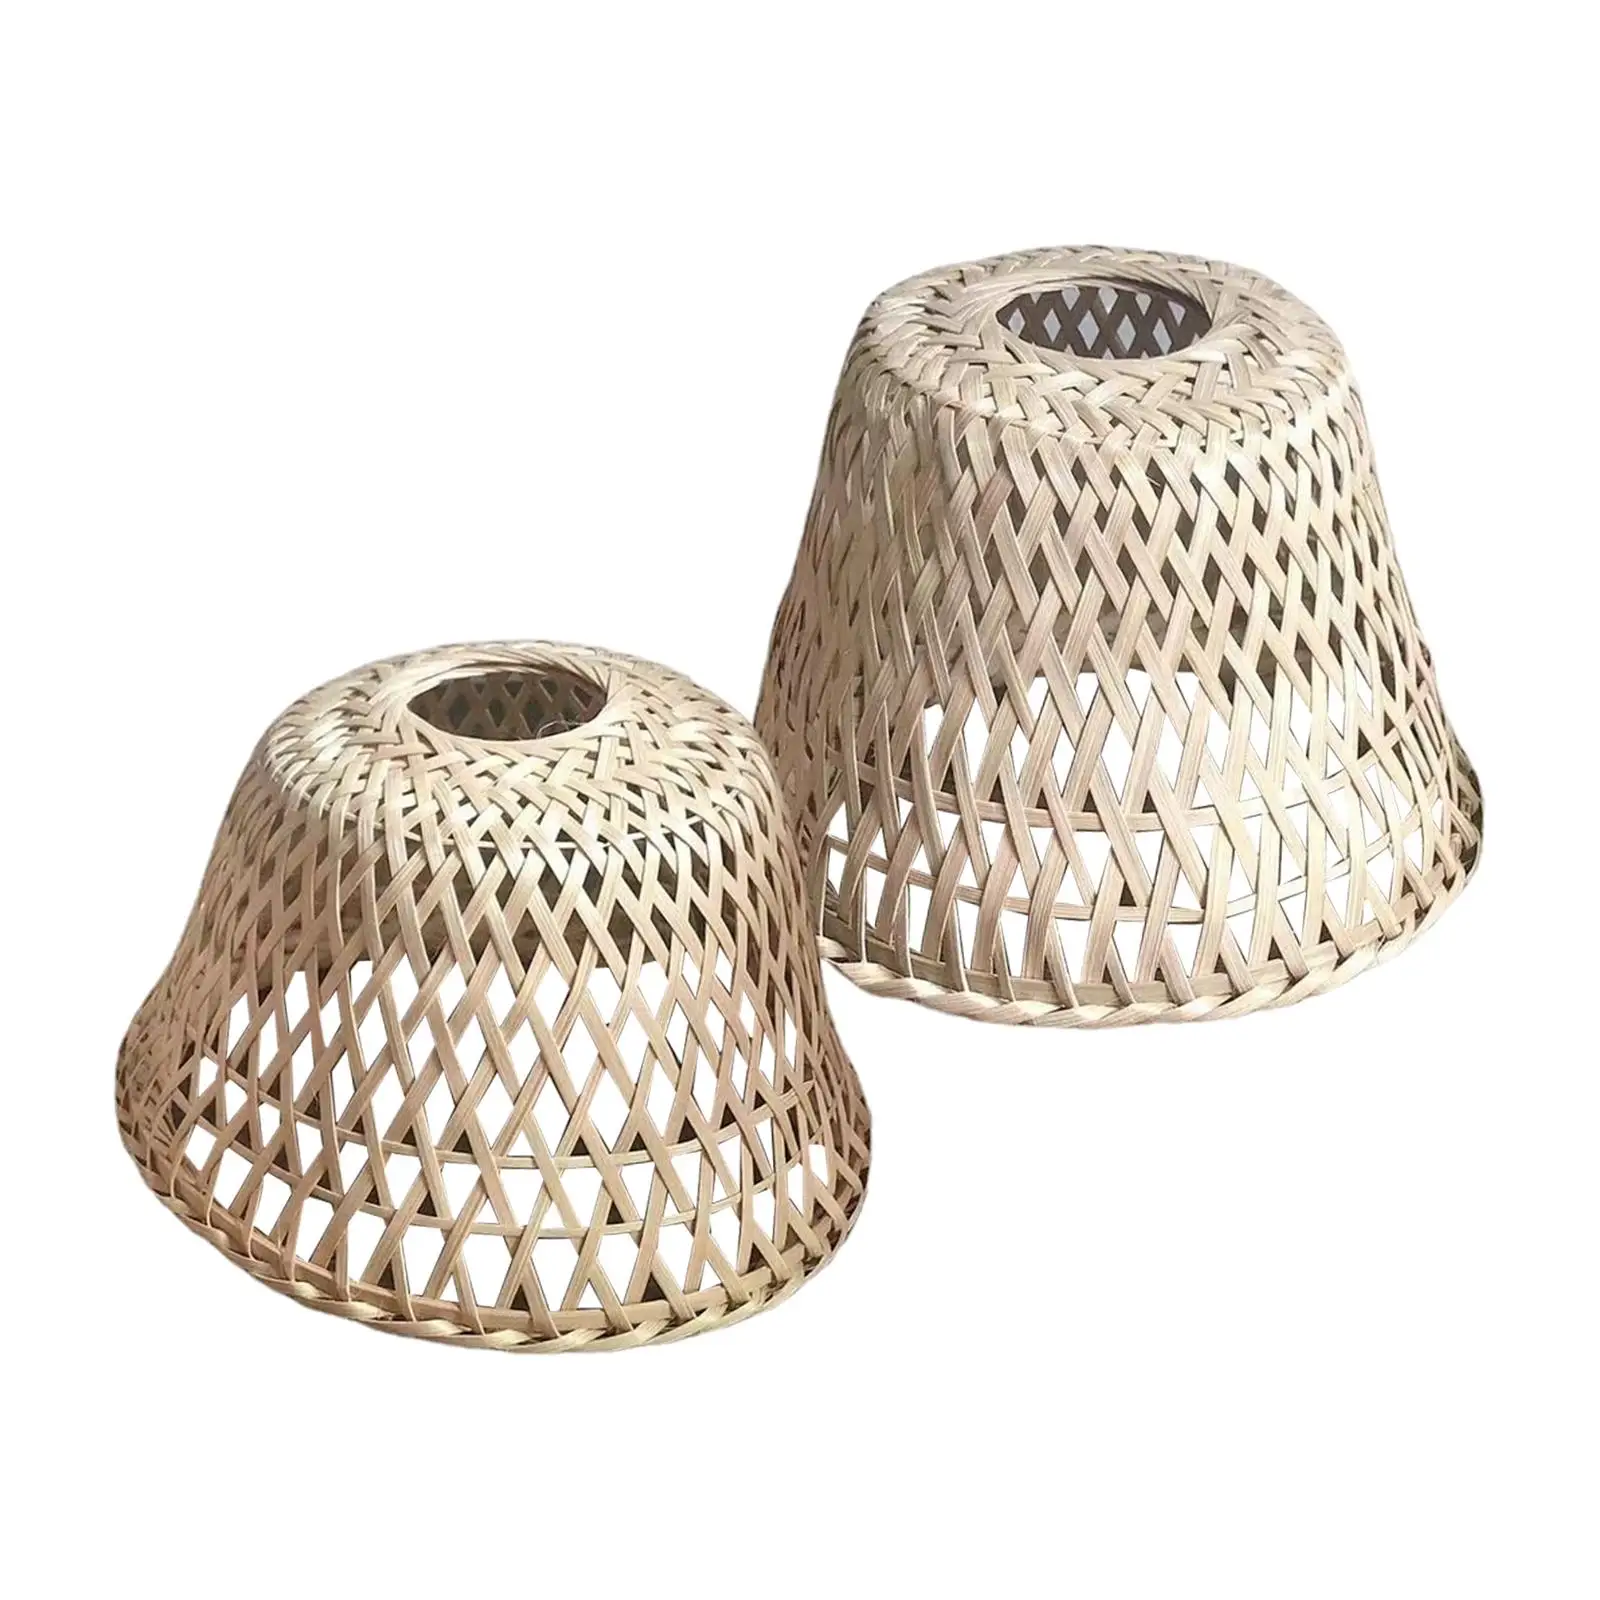 Retro Style Bamboo Weave Hanging Lamp Shade for Kitchen Bedroom Replacement Durable Farmhouse Decor Chandelier Cover Dust Proof